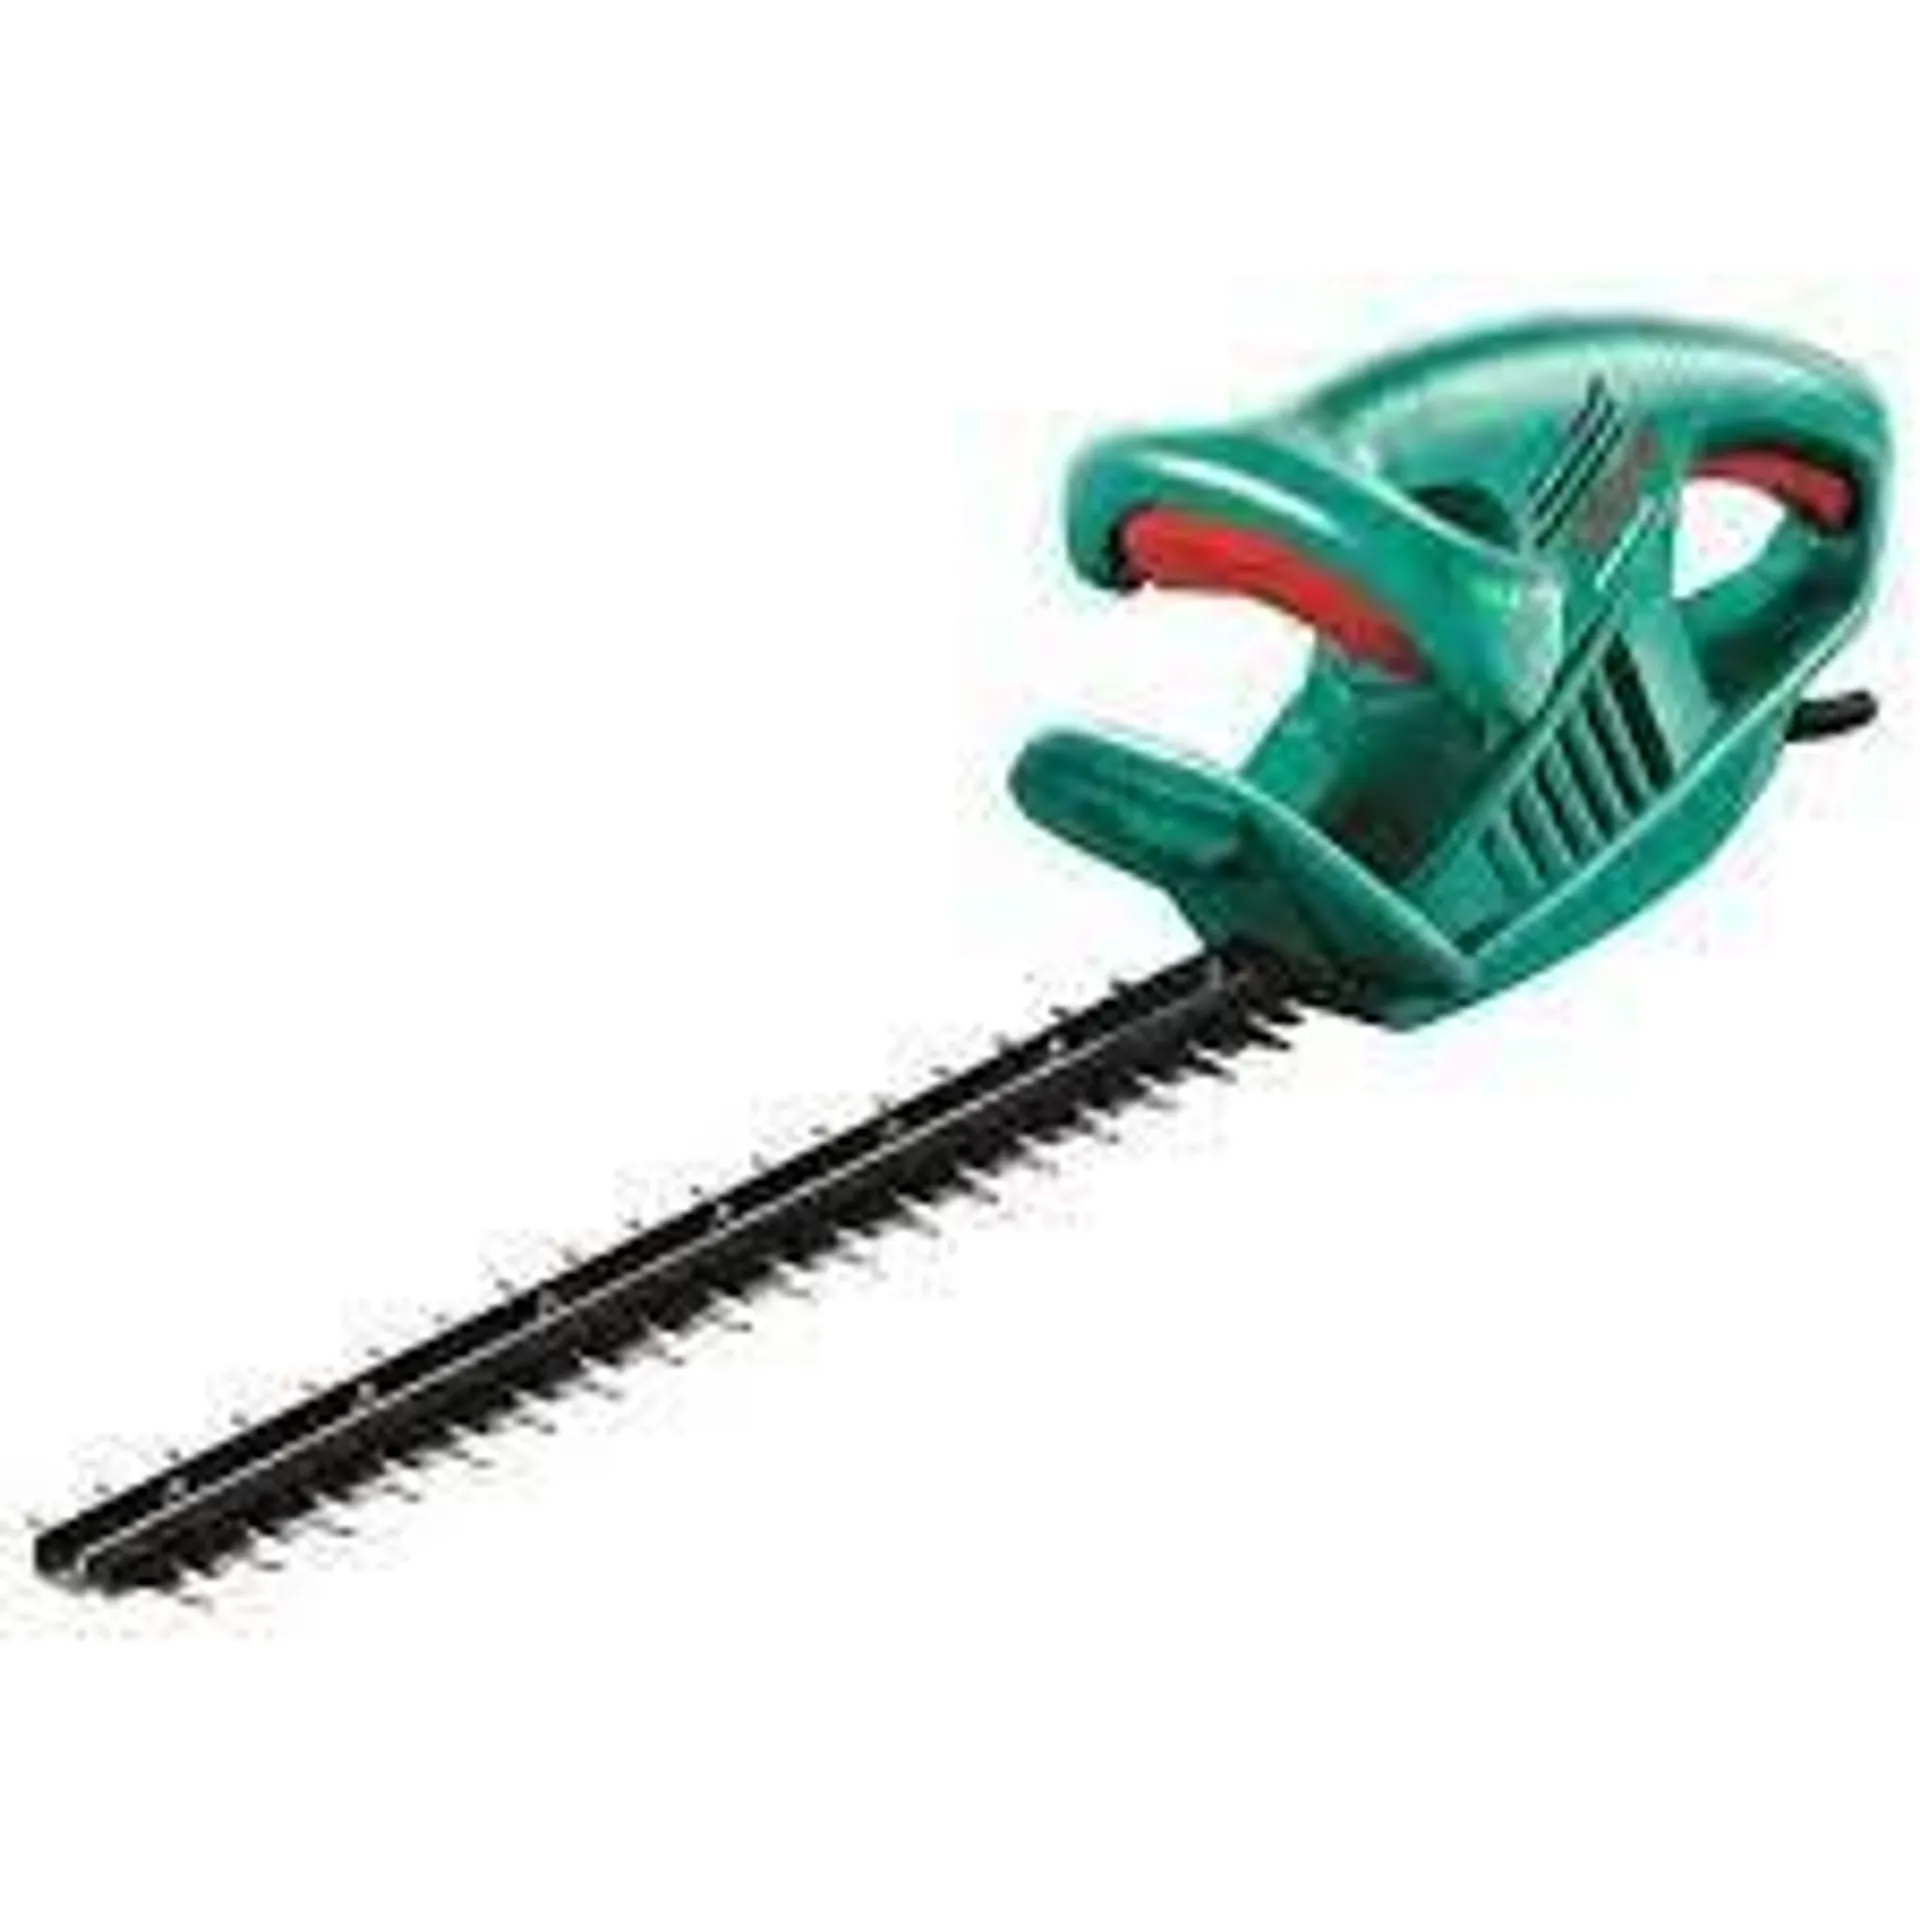 BOSCH Easy Hedge Cute 45-16 Hedge Trimmer – 0600847A71